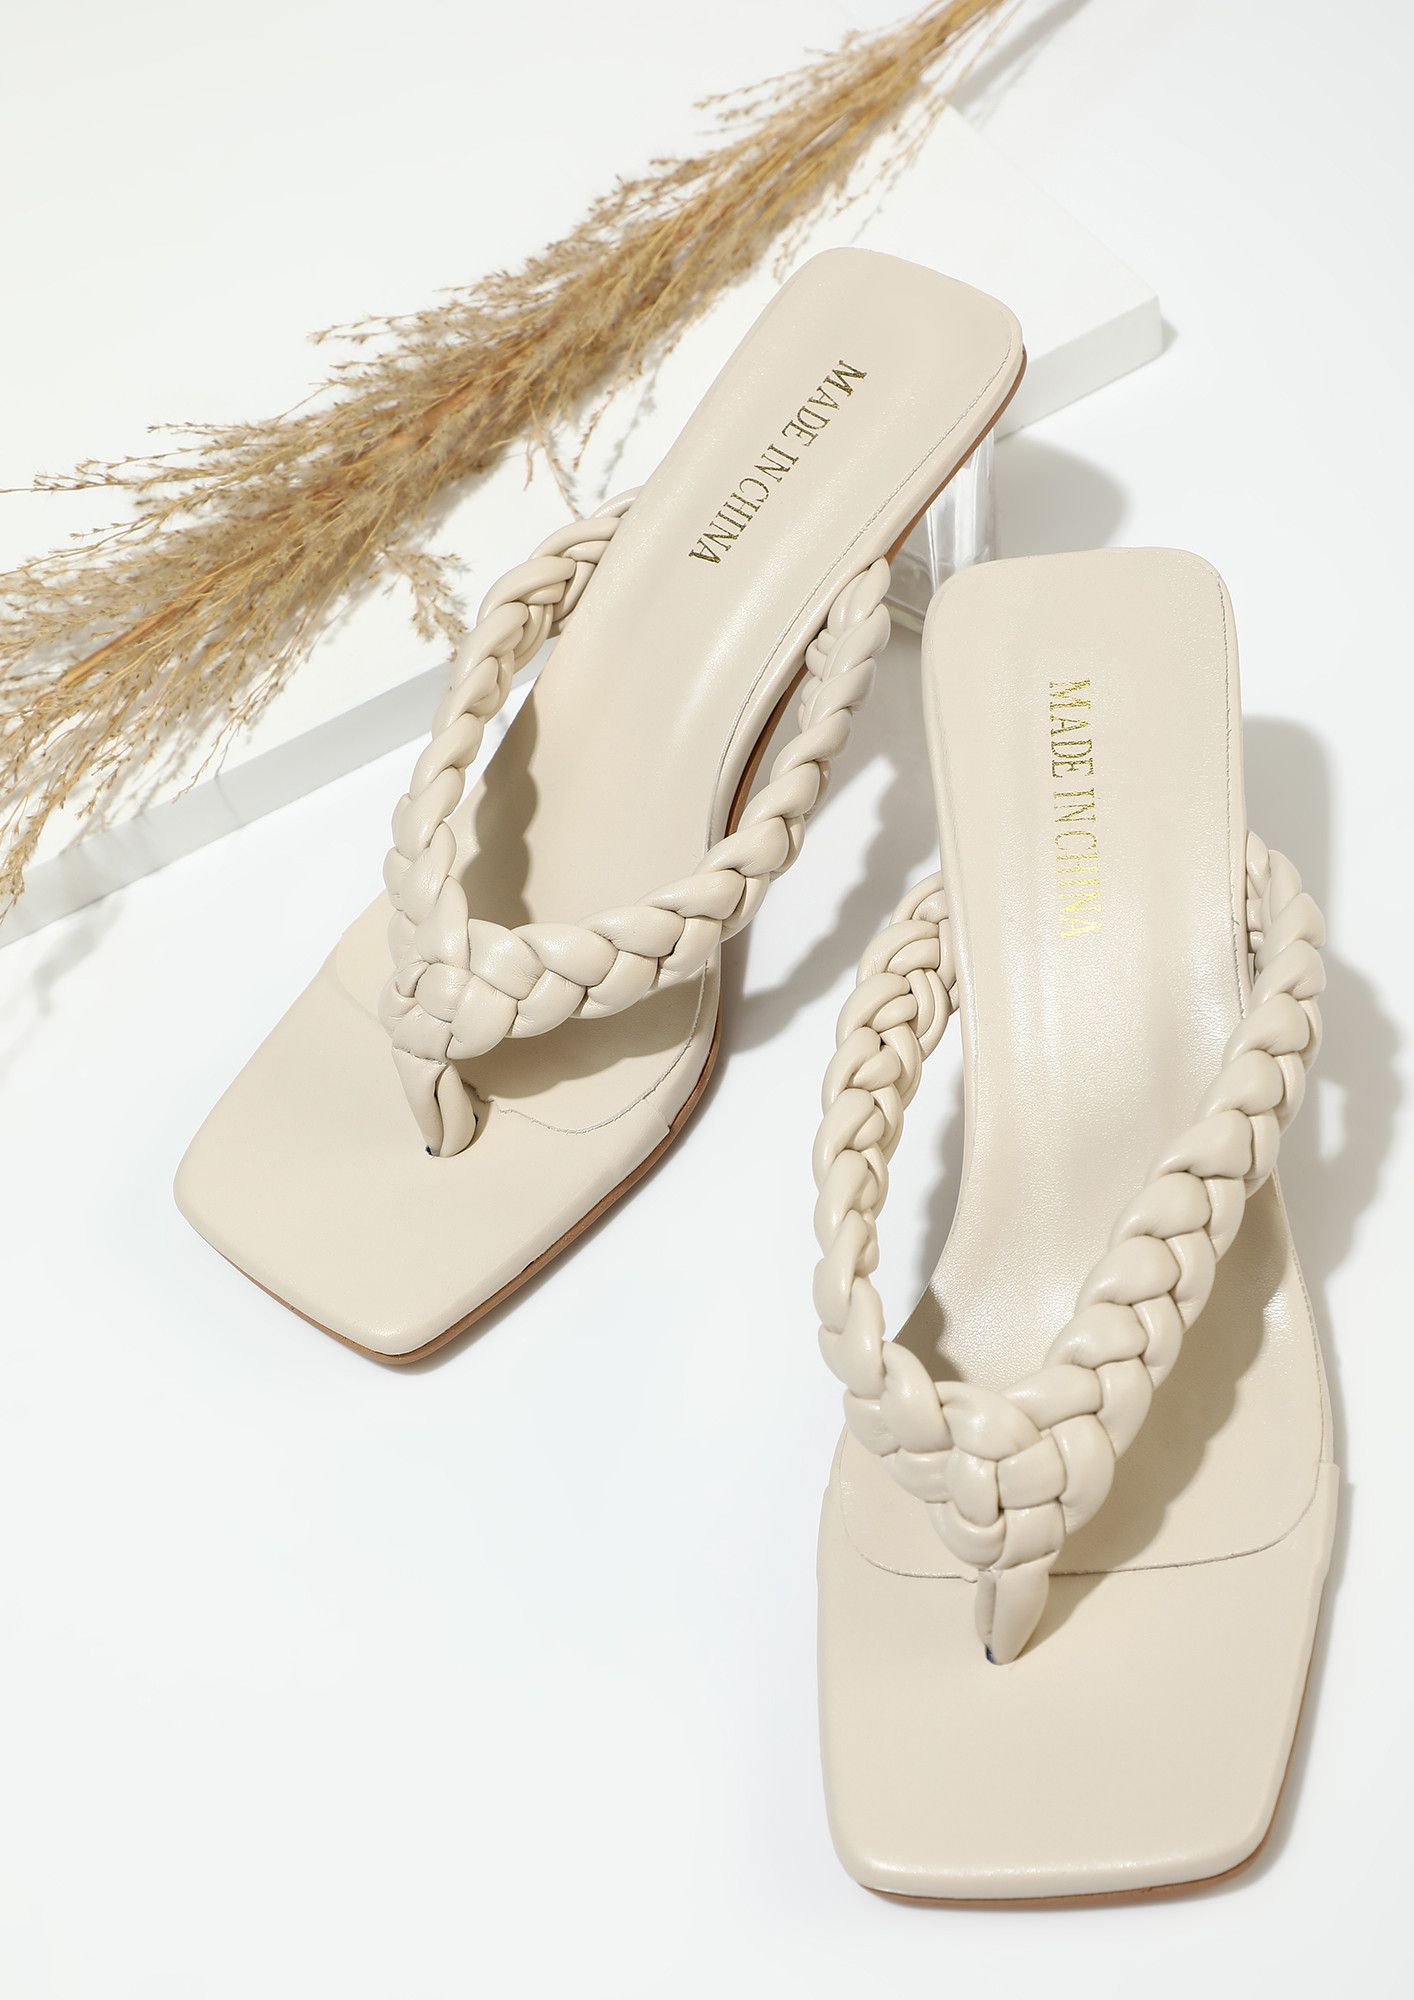 TIE TOGETHER BY FATE BEIGE HEELED SANDALS